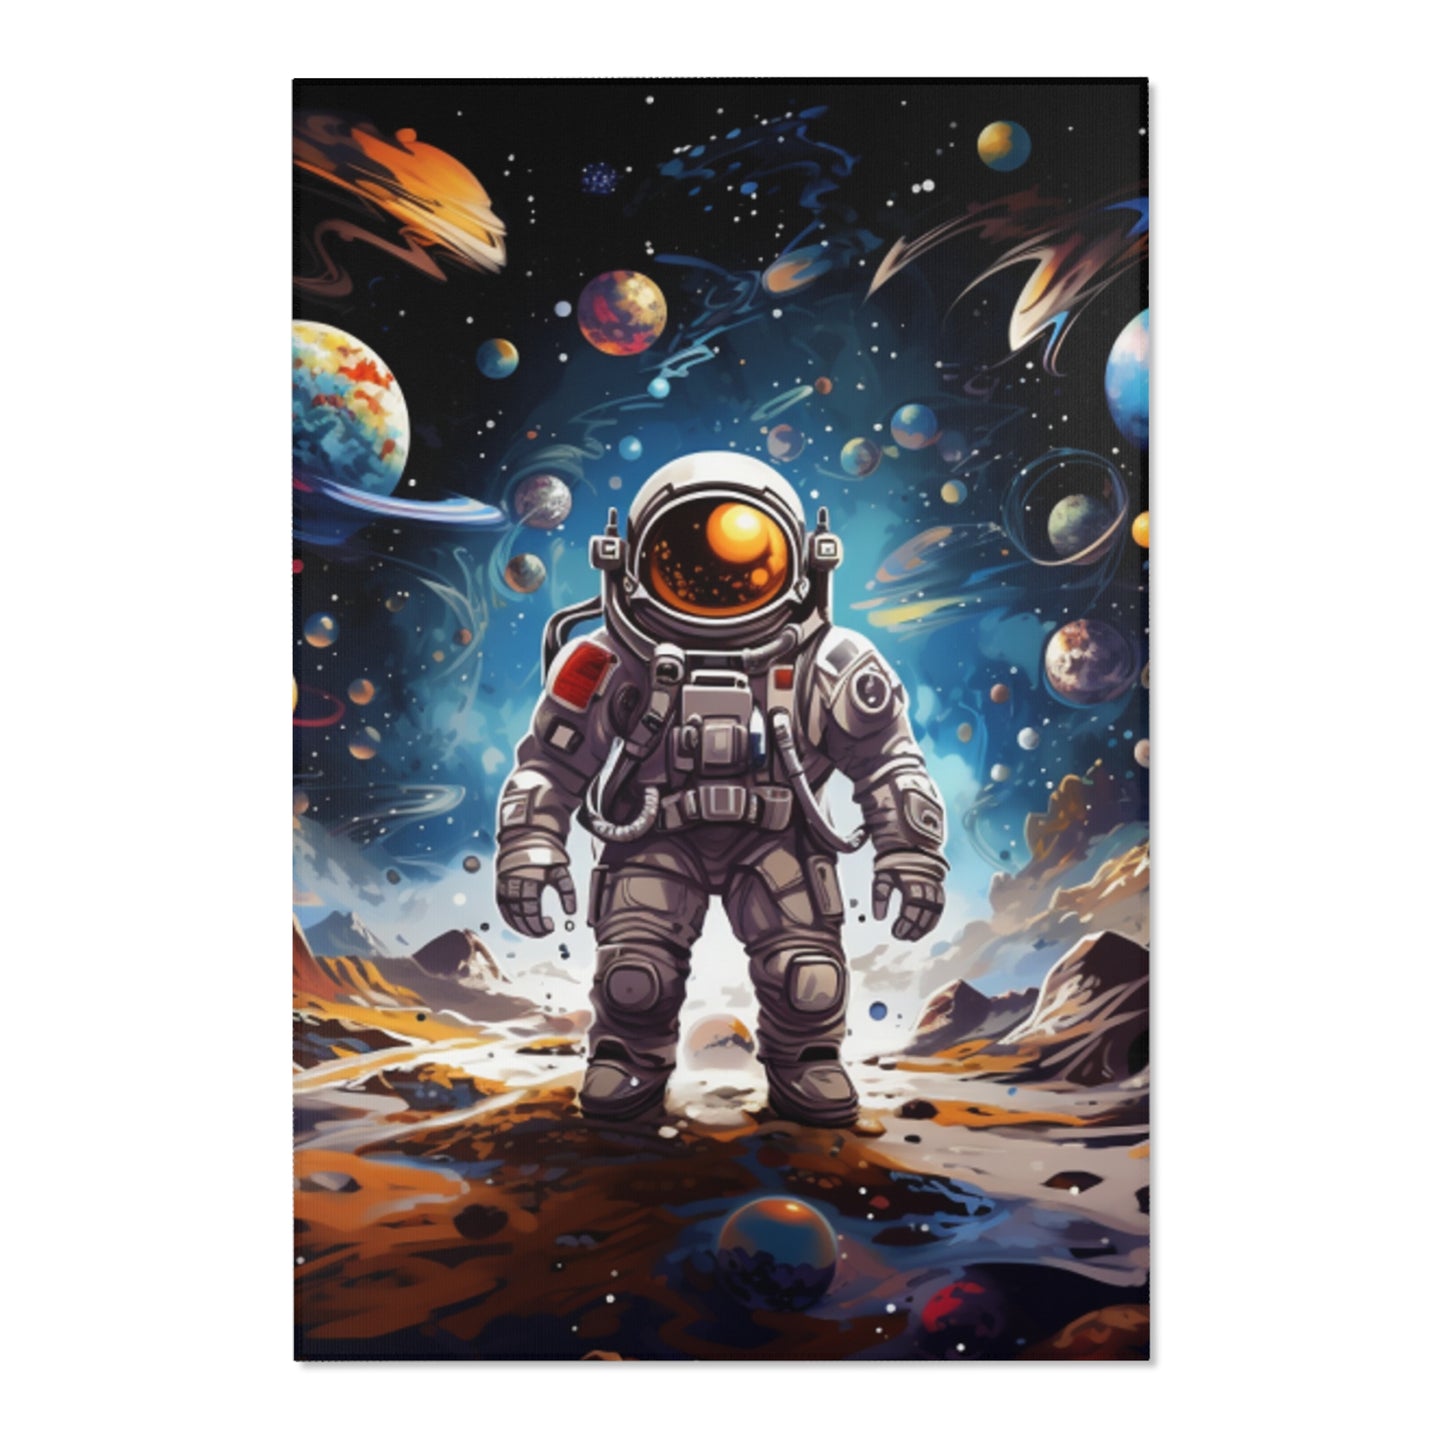 Galactic Voyage: Astronaut Journey in Celestial Star Cosmic Exploration - Area Rugs